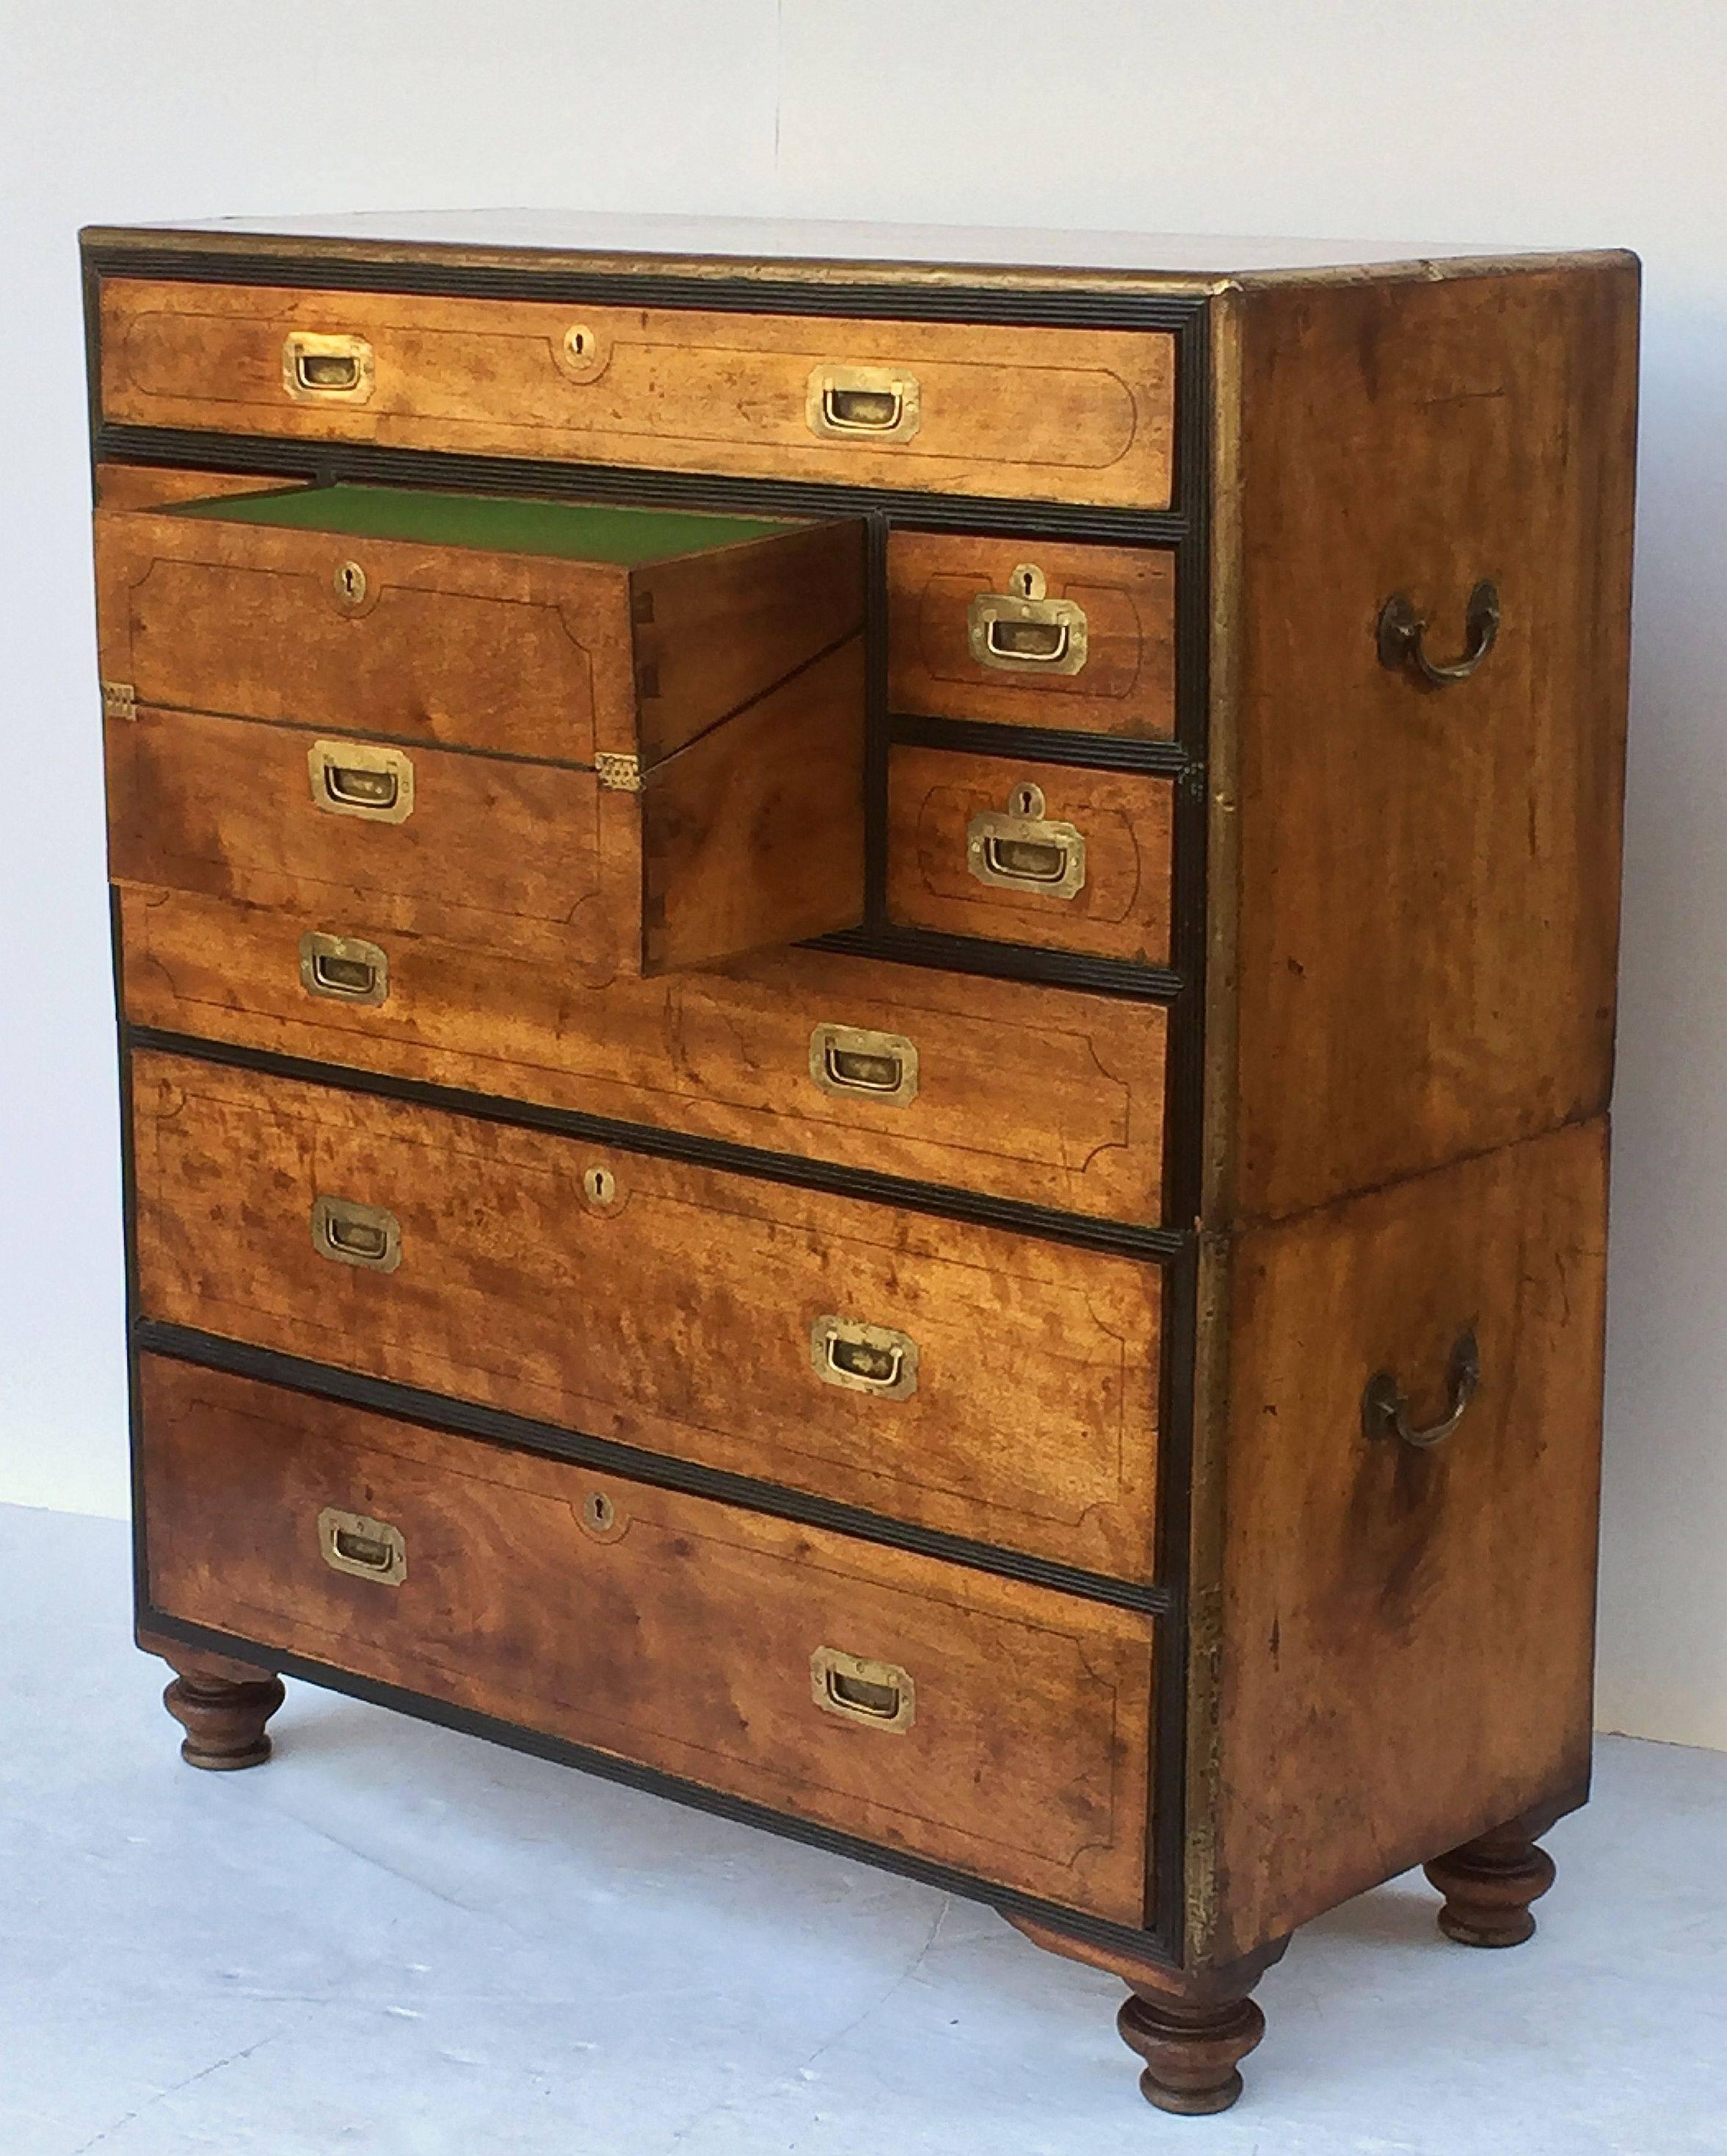 Ebonized British Military Officer's Campaign Chest Secretary of Brass-Bound Camphor Wood